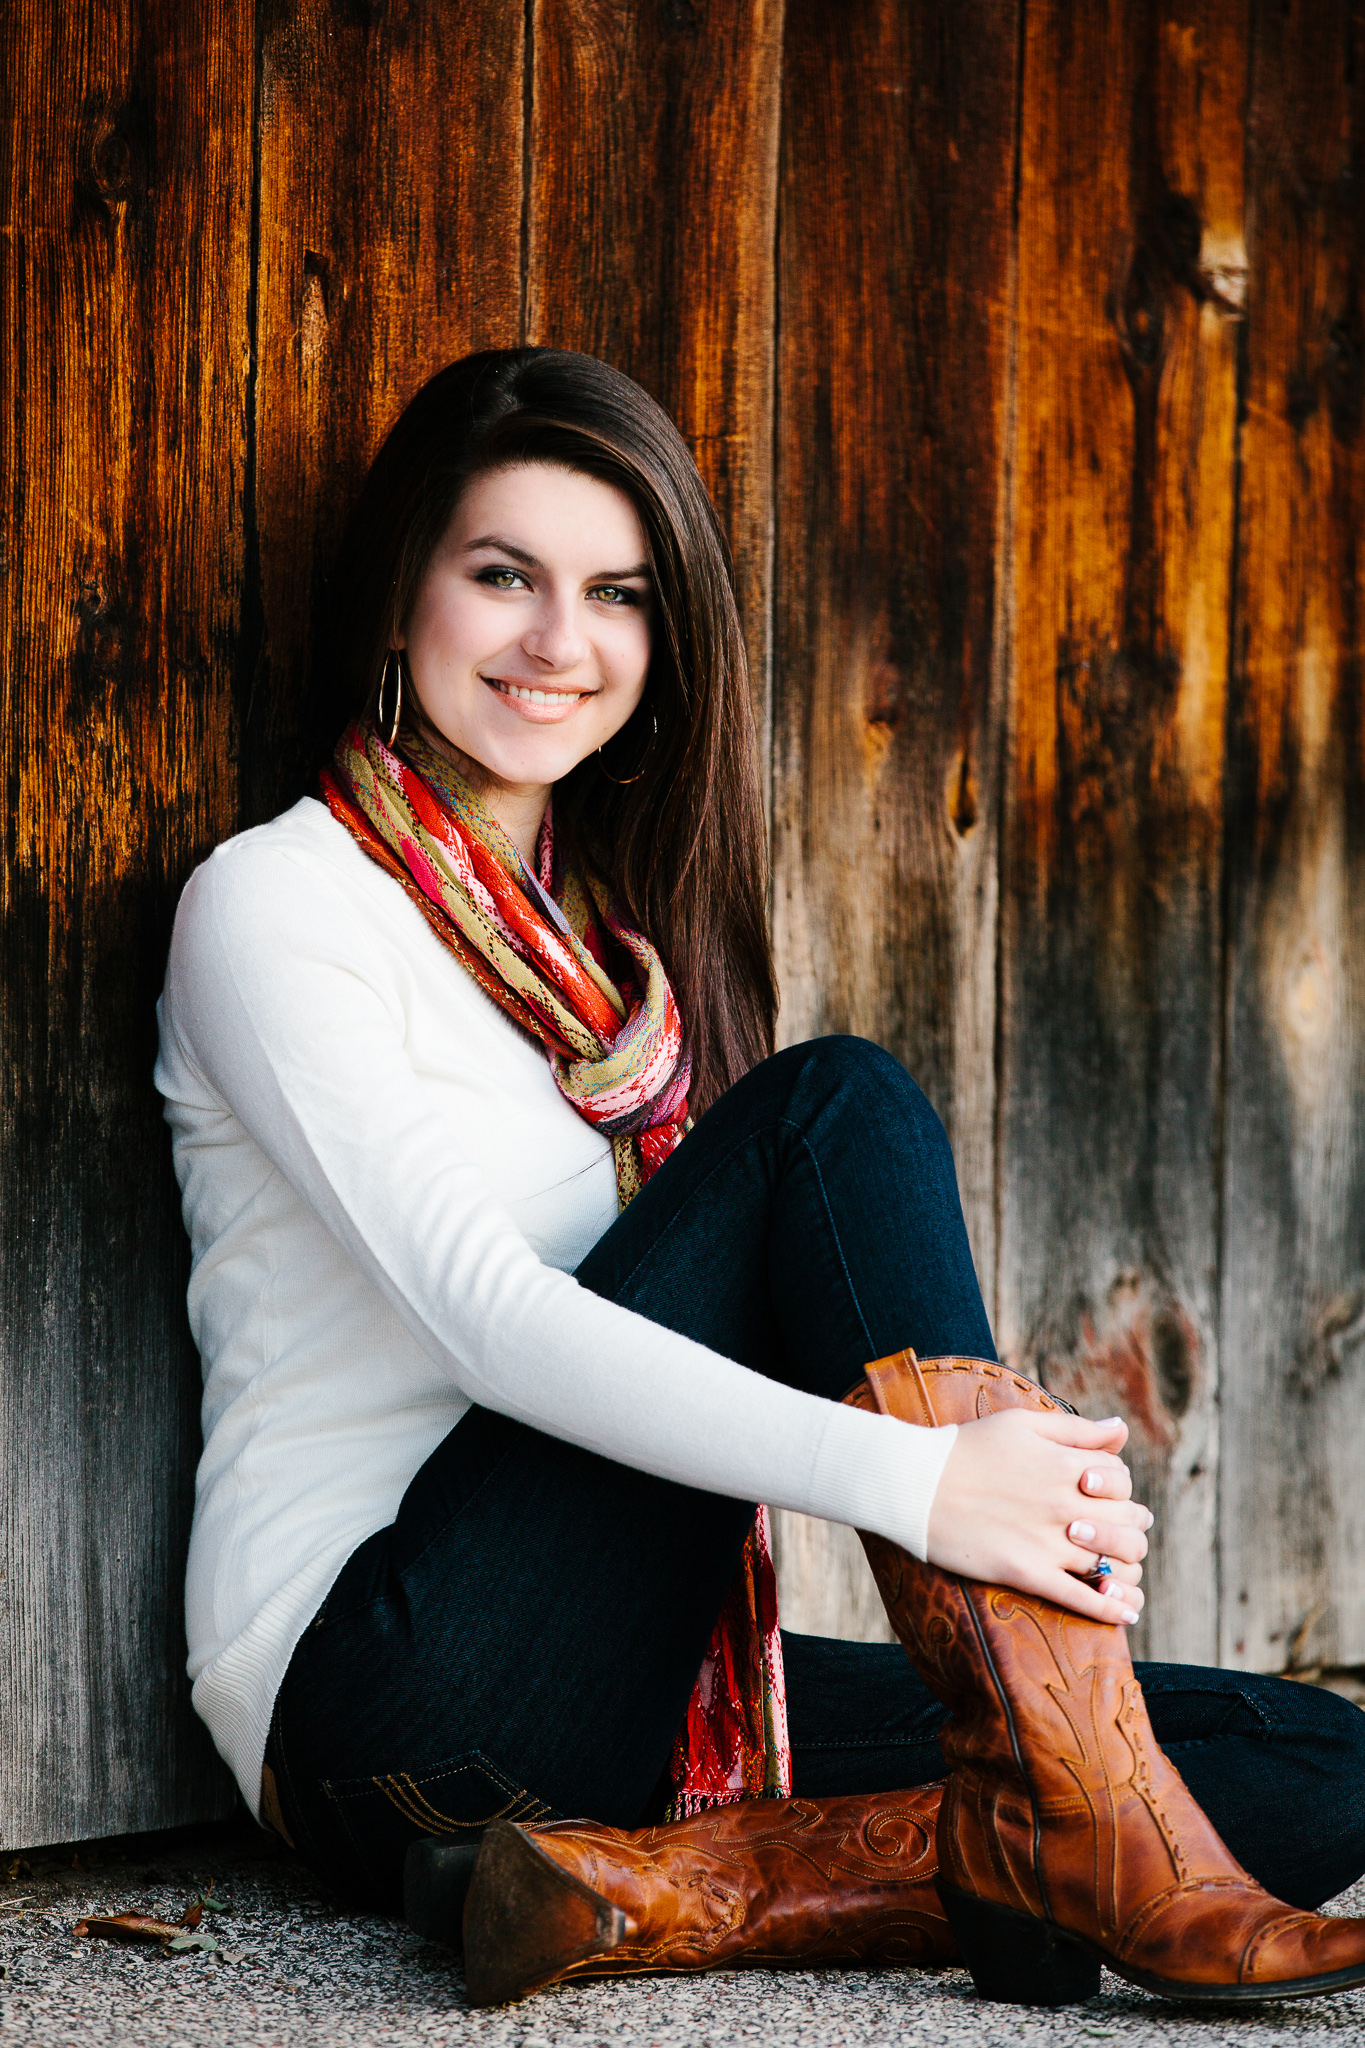 Red mill senior picture by rustic wood photo